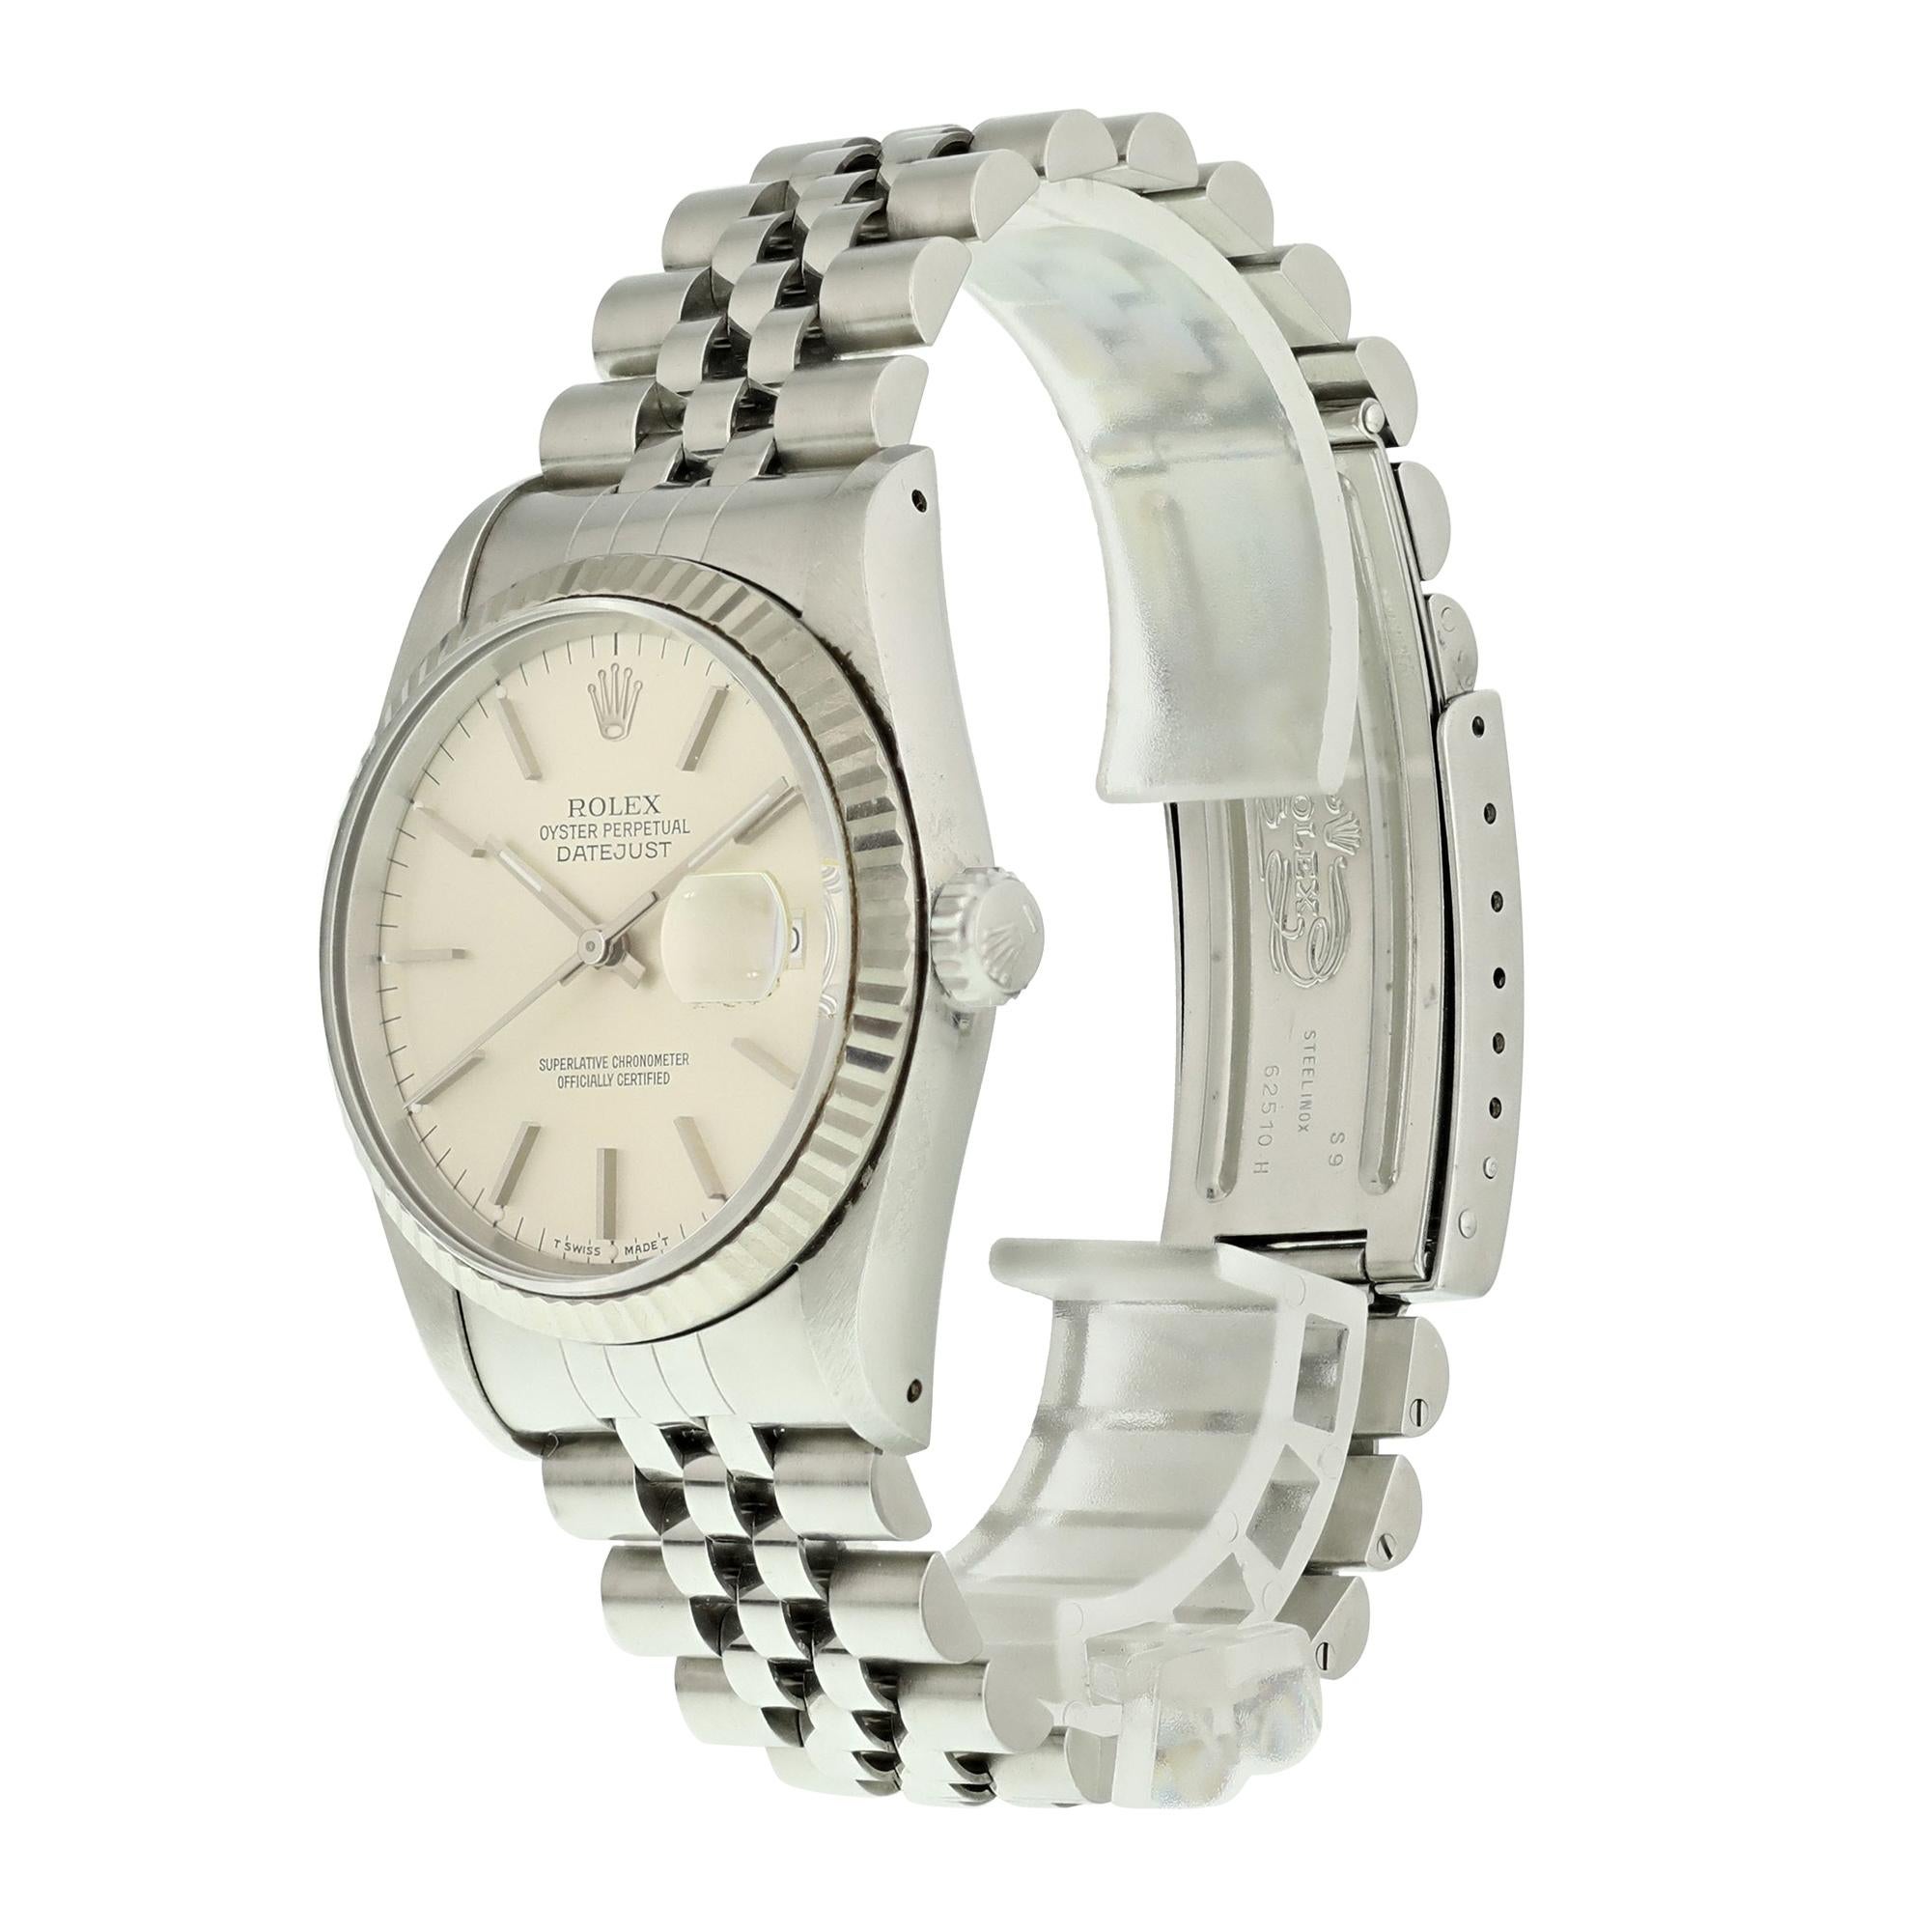 Rolex Oyster Perpetual Datejust 16234 Men’s Watch In Excellent Condition For Sale In New York, NY